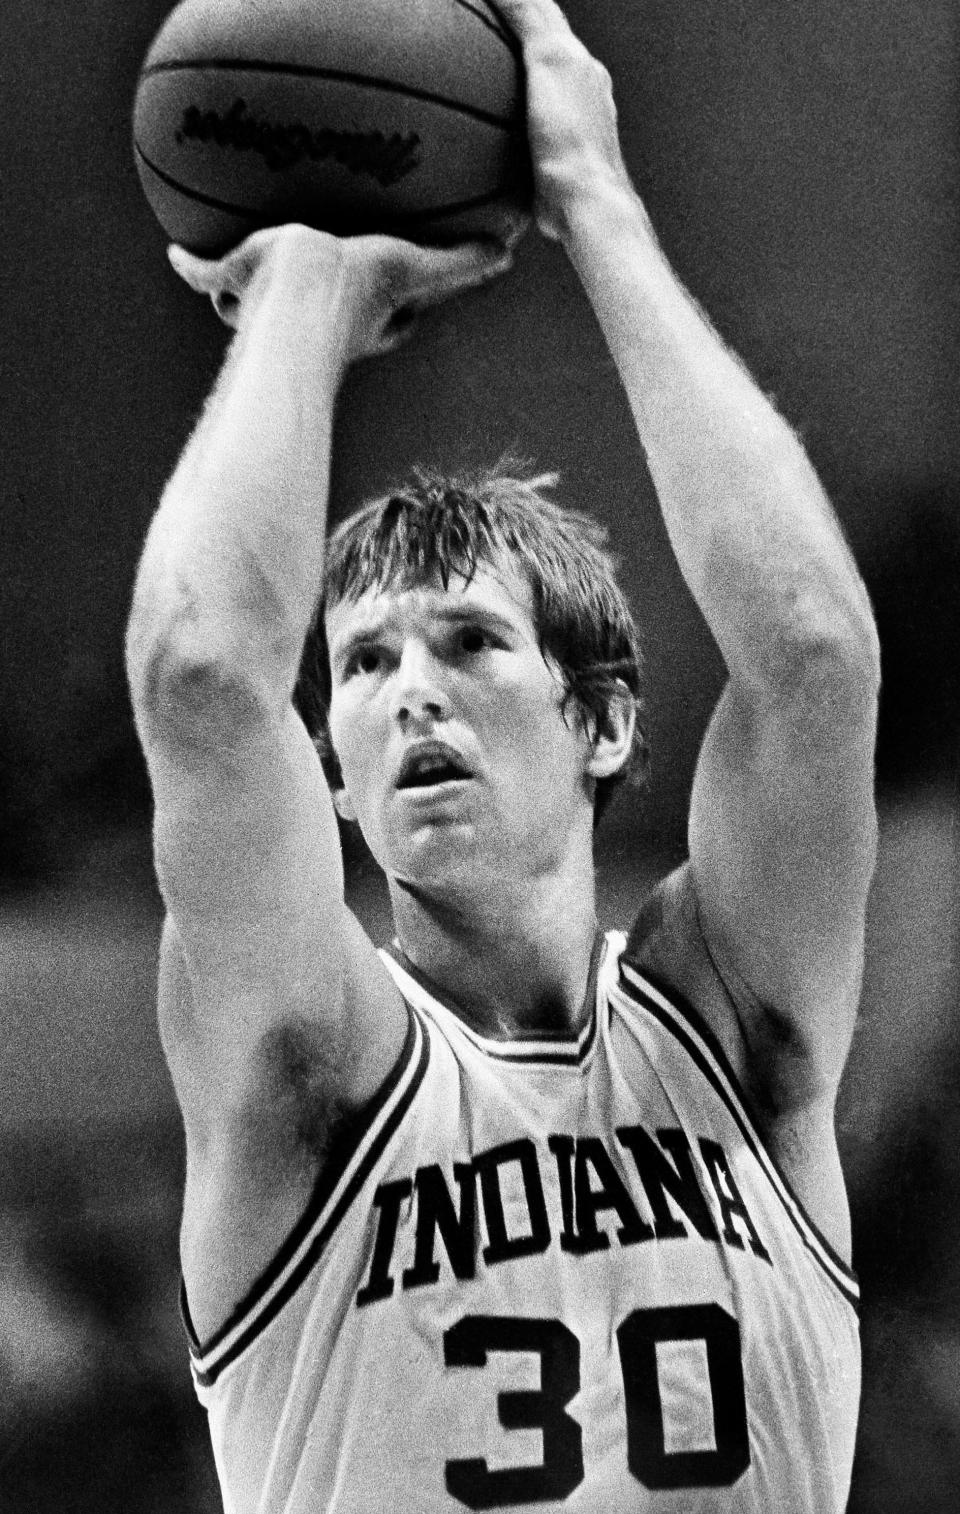 Ted Kitchel, 6' 8" junior for Indiana University, prepares to fire one of the 18 free throws he hit in a row to set a Big Ten record Saturday, January 12, 1981, during the Hoosiers' 78-61 victory over 11th ranked Illinois. Kitchel pumped in 11 of 13 field goal attempts for a career and game high 40 points.